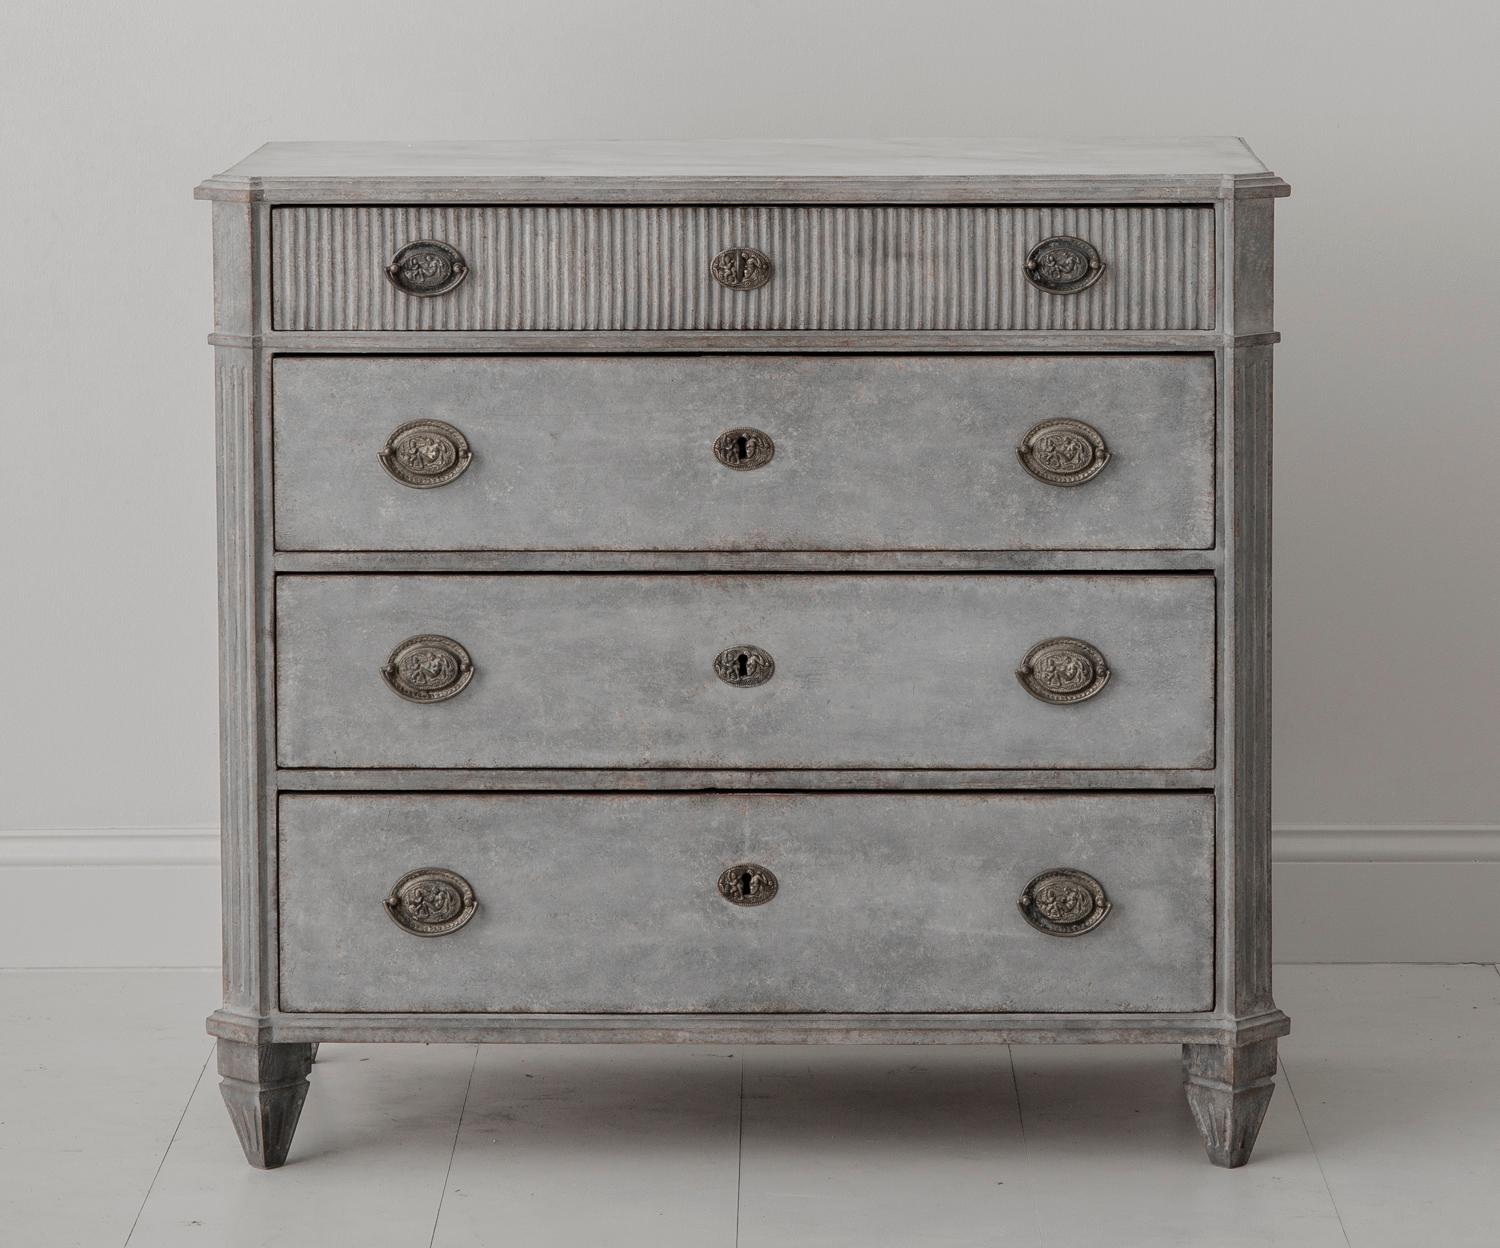 A handsome, neoclassical chest in the Gustavian style with a hand-painted marbleized top. The patina is mix of light blue and grey. There are four drawers, the top fully reeded, with brass hardware. The corners are canted and fluted and the chest is